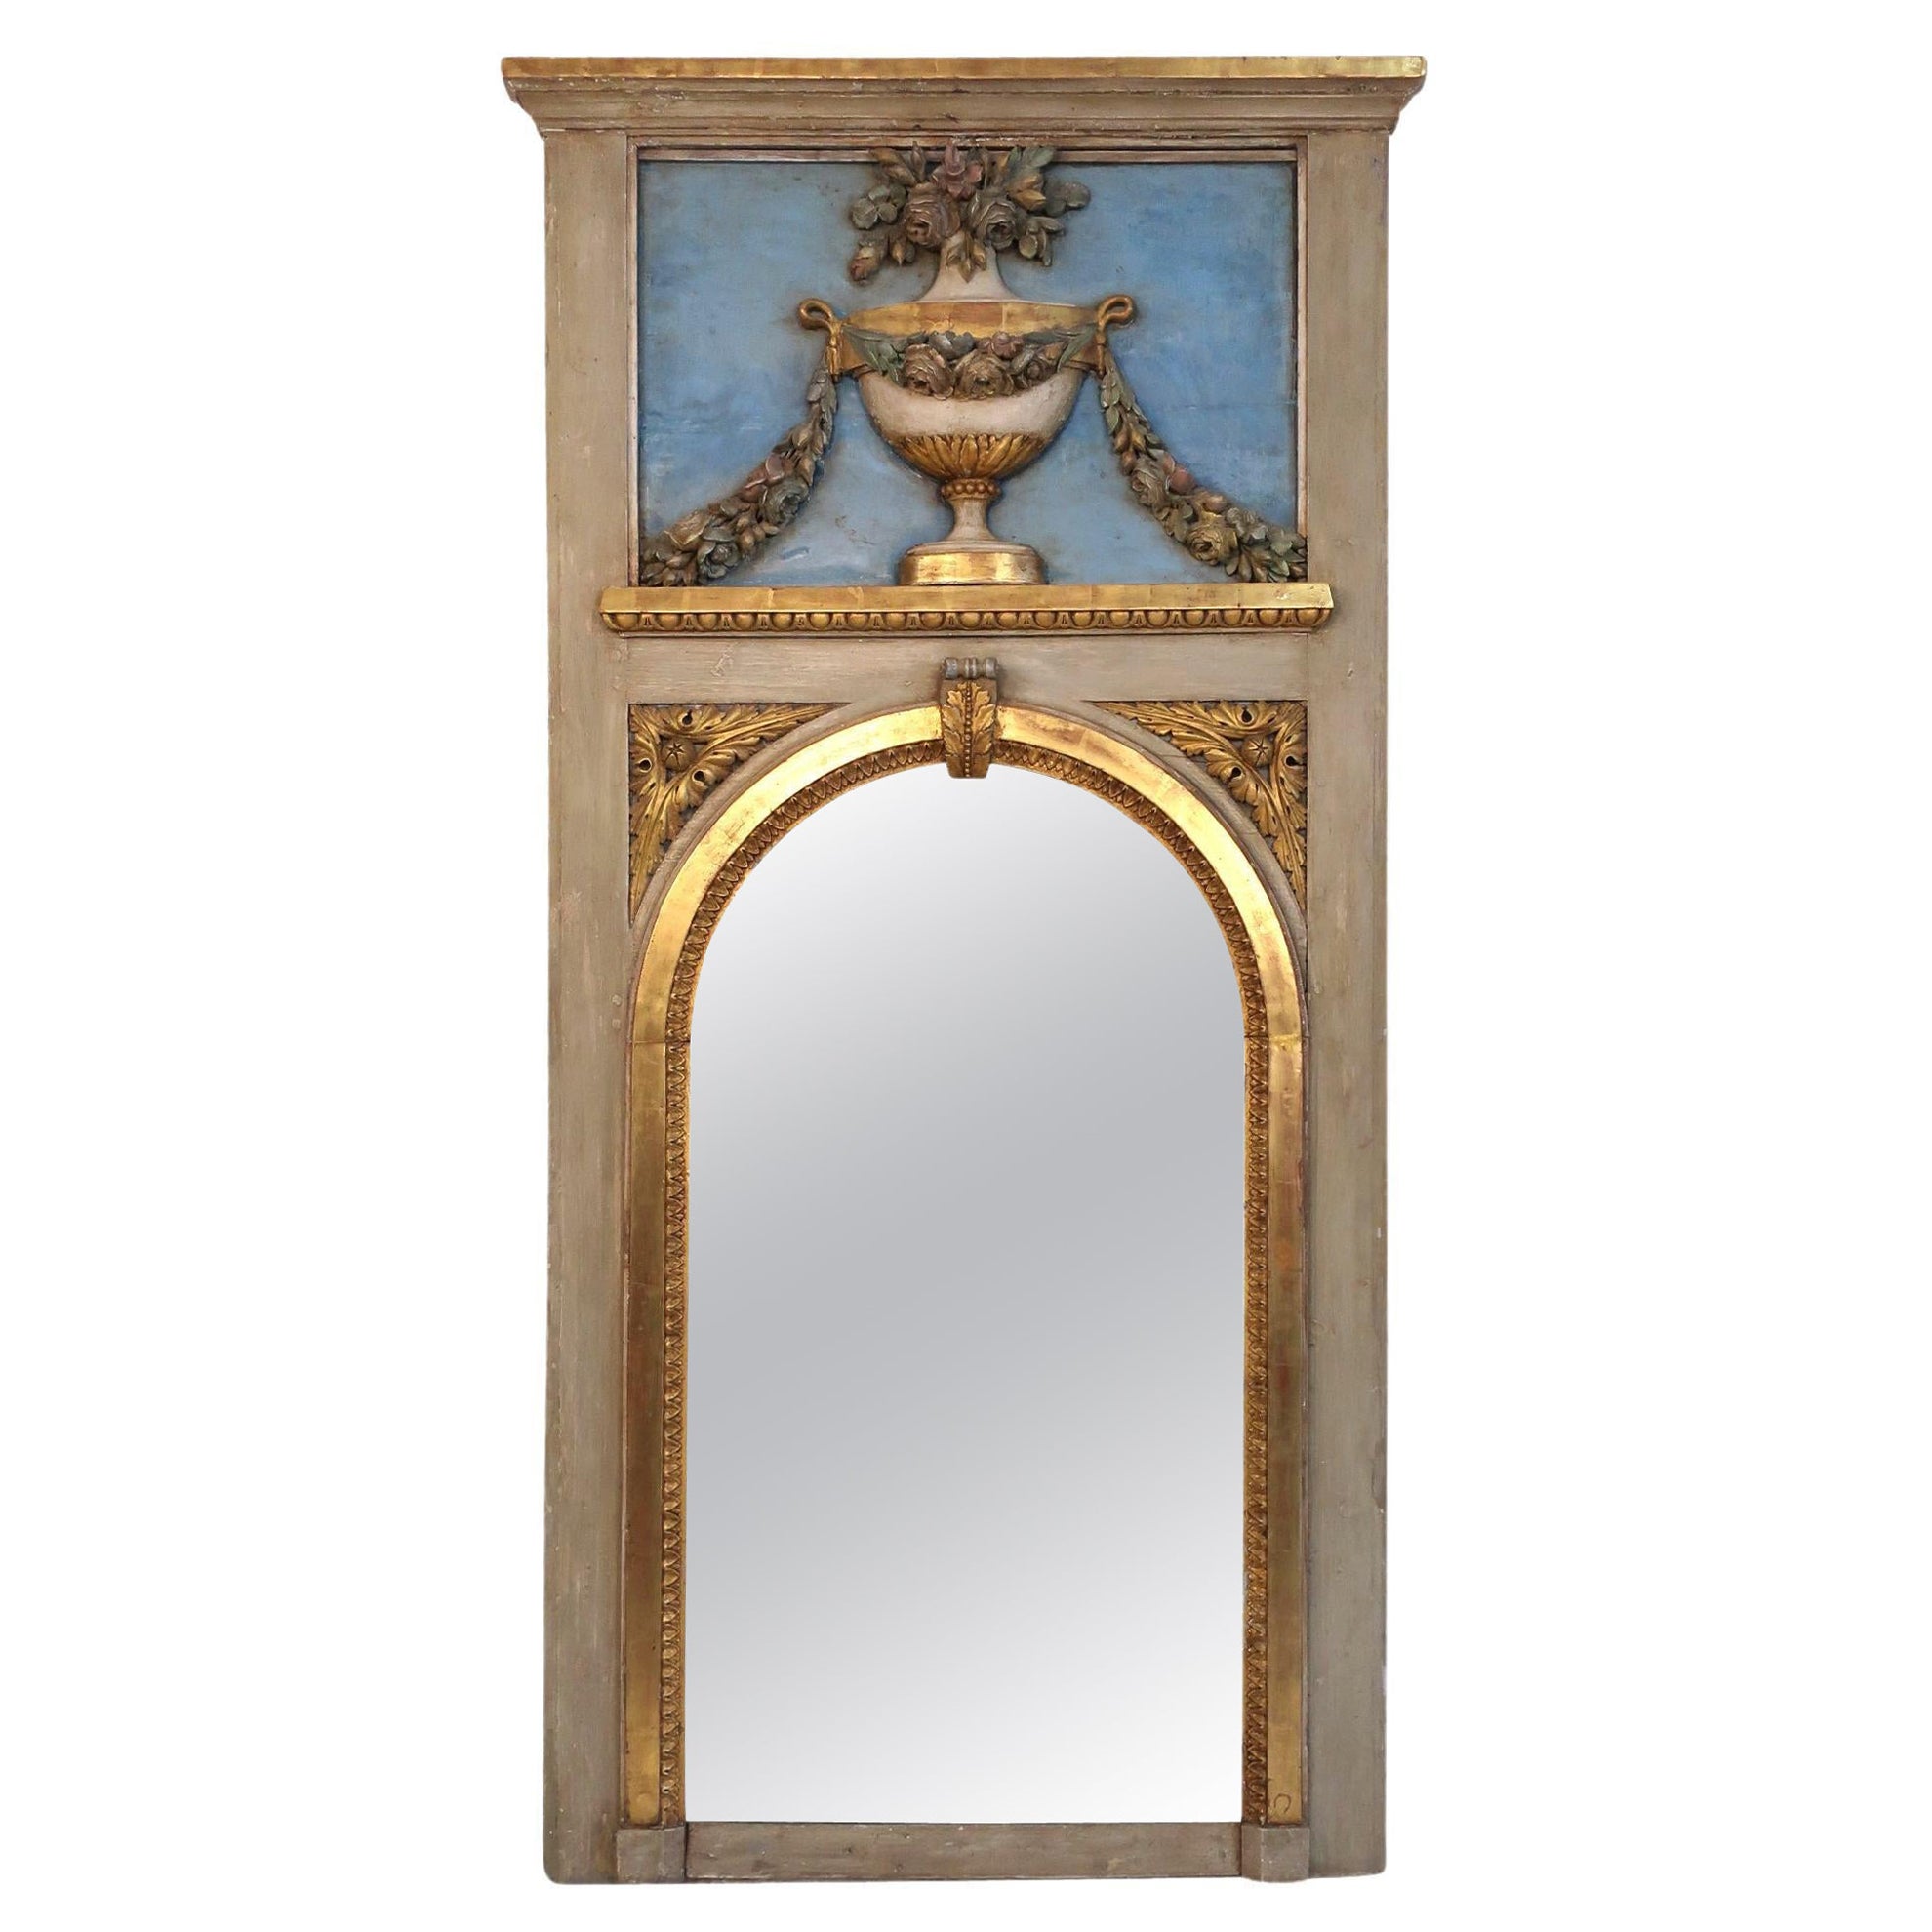 19th Century Blue Trumeau Mirror with Urn, Garland and Floral Decoration 